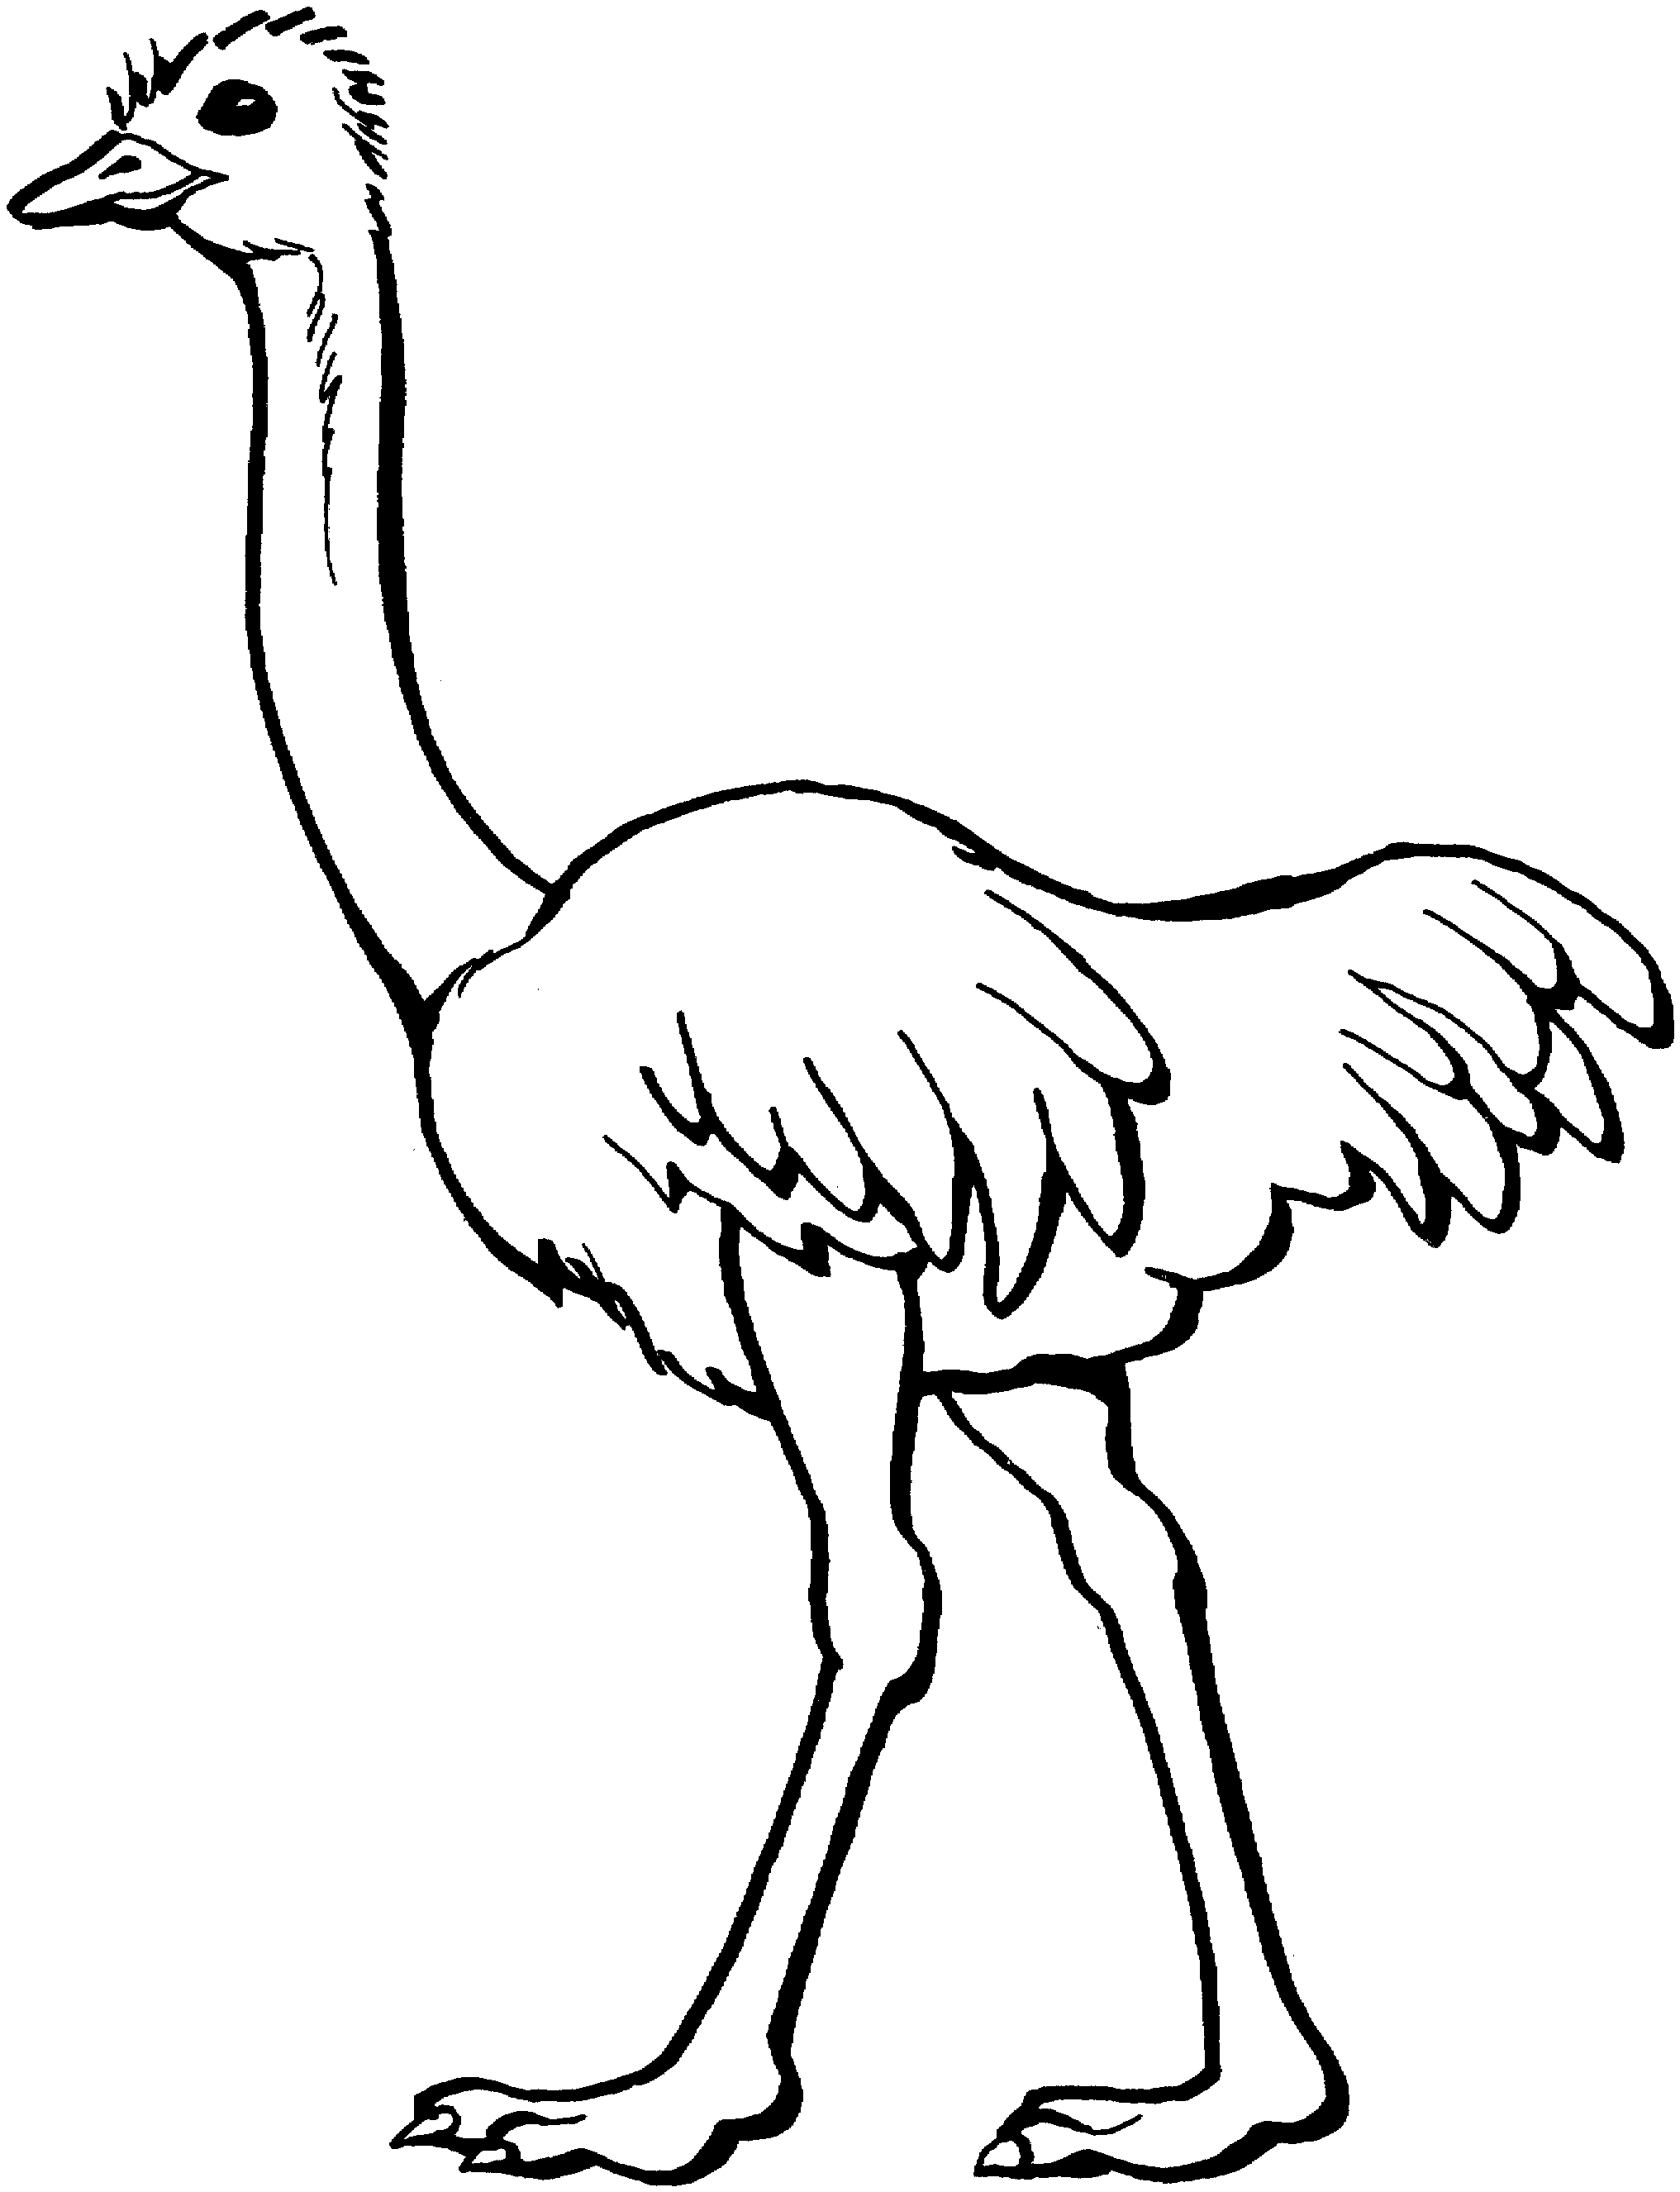 Ostrich Coloring Page - Free Clipart Images